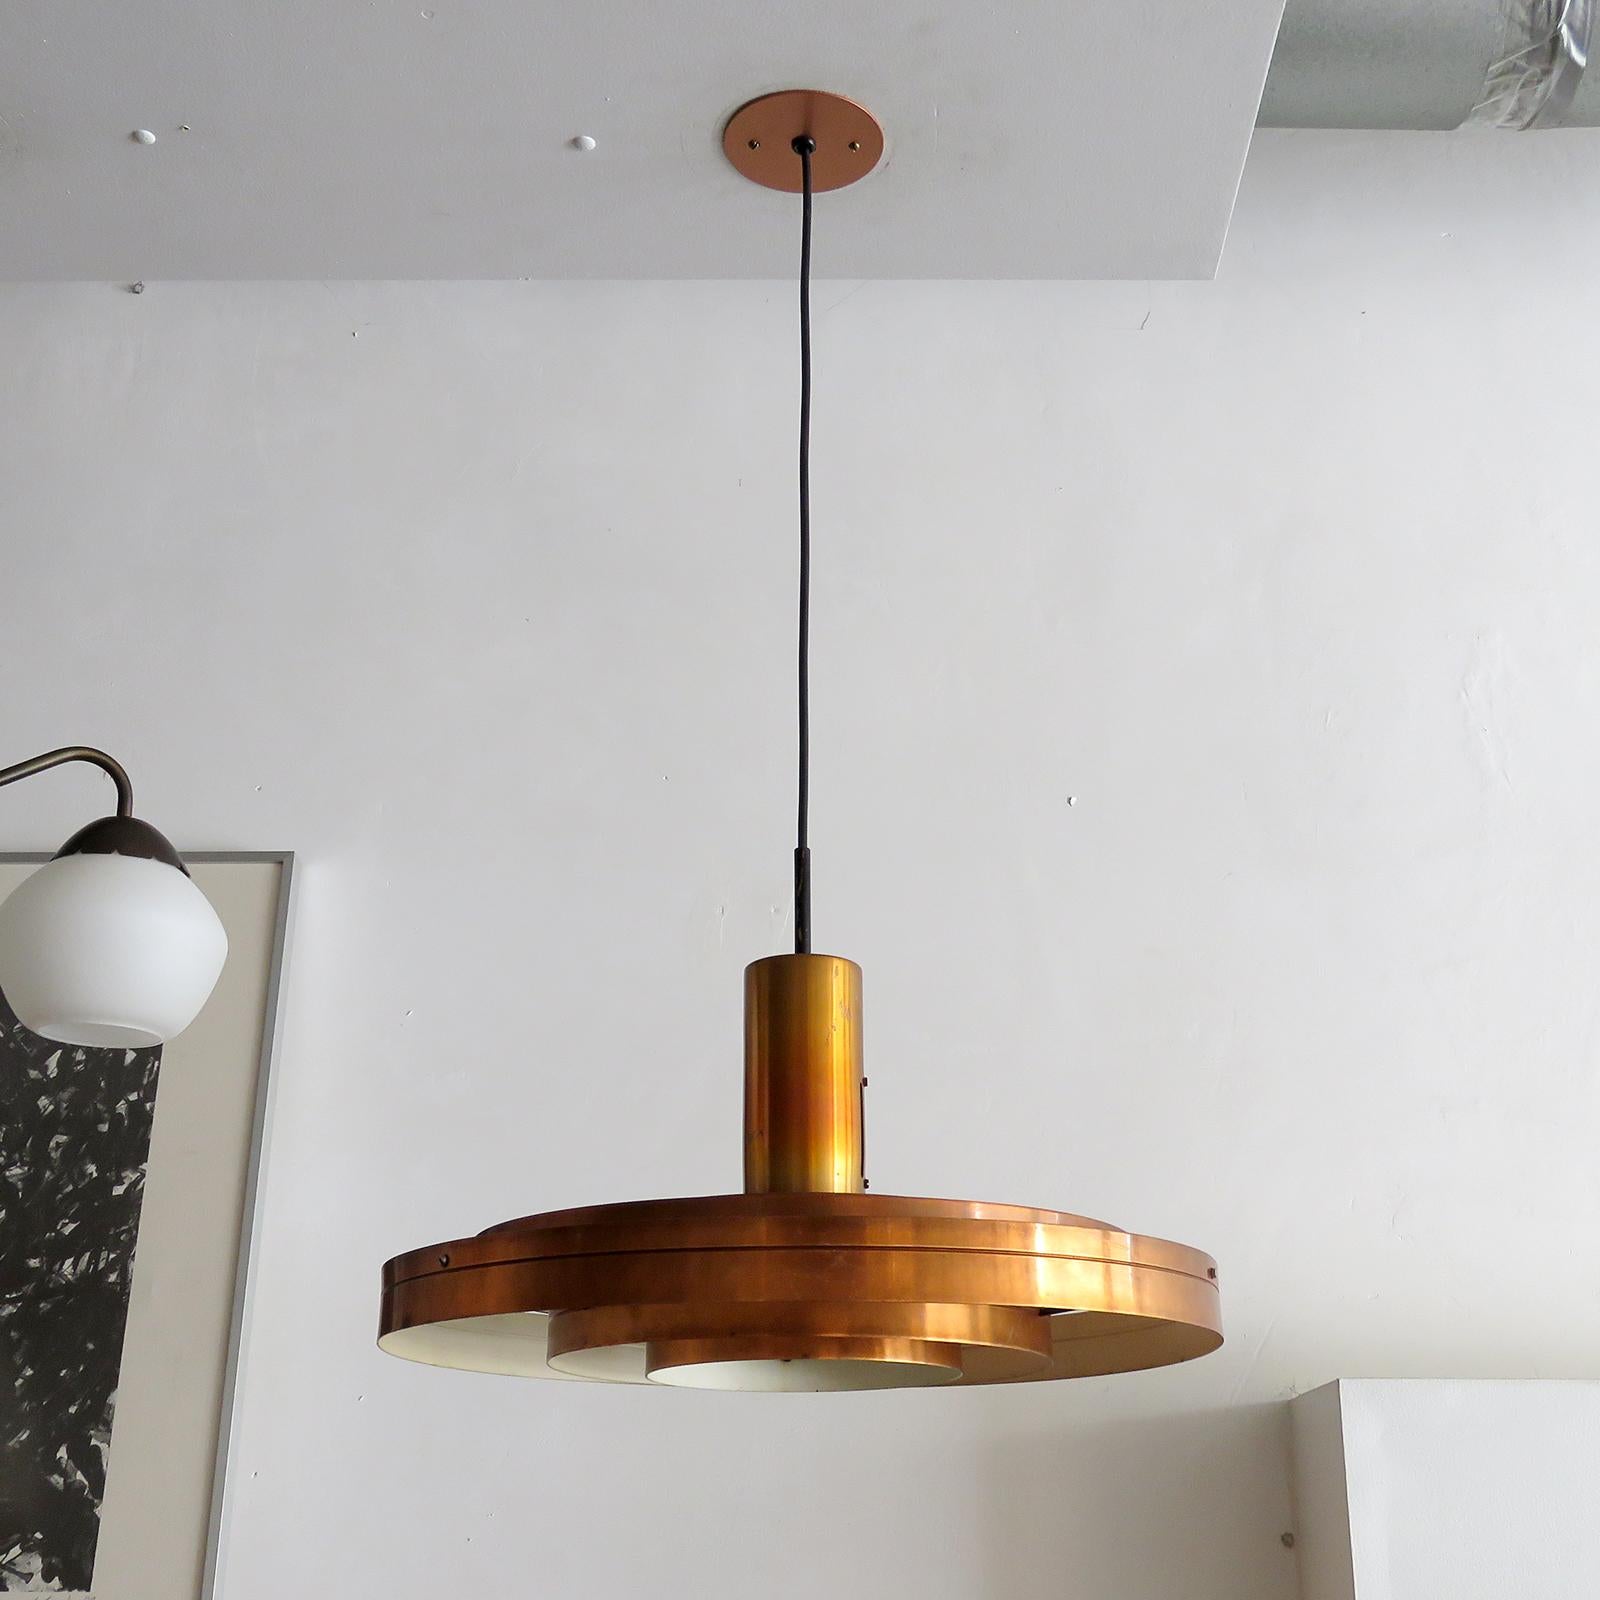 Wonderful model 'Fibonacci' copper pendants by Sophus Frandsen for Fog & Mørup, 1960, made of concentric copper bands, designed in 1960, wired for US standards, one E27 socket, max. wattage 75w each or LED equivalent, bulb provided as a onetime